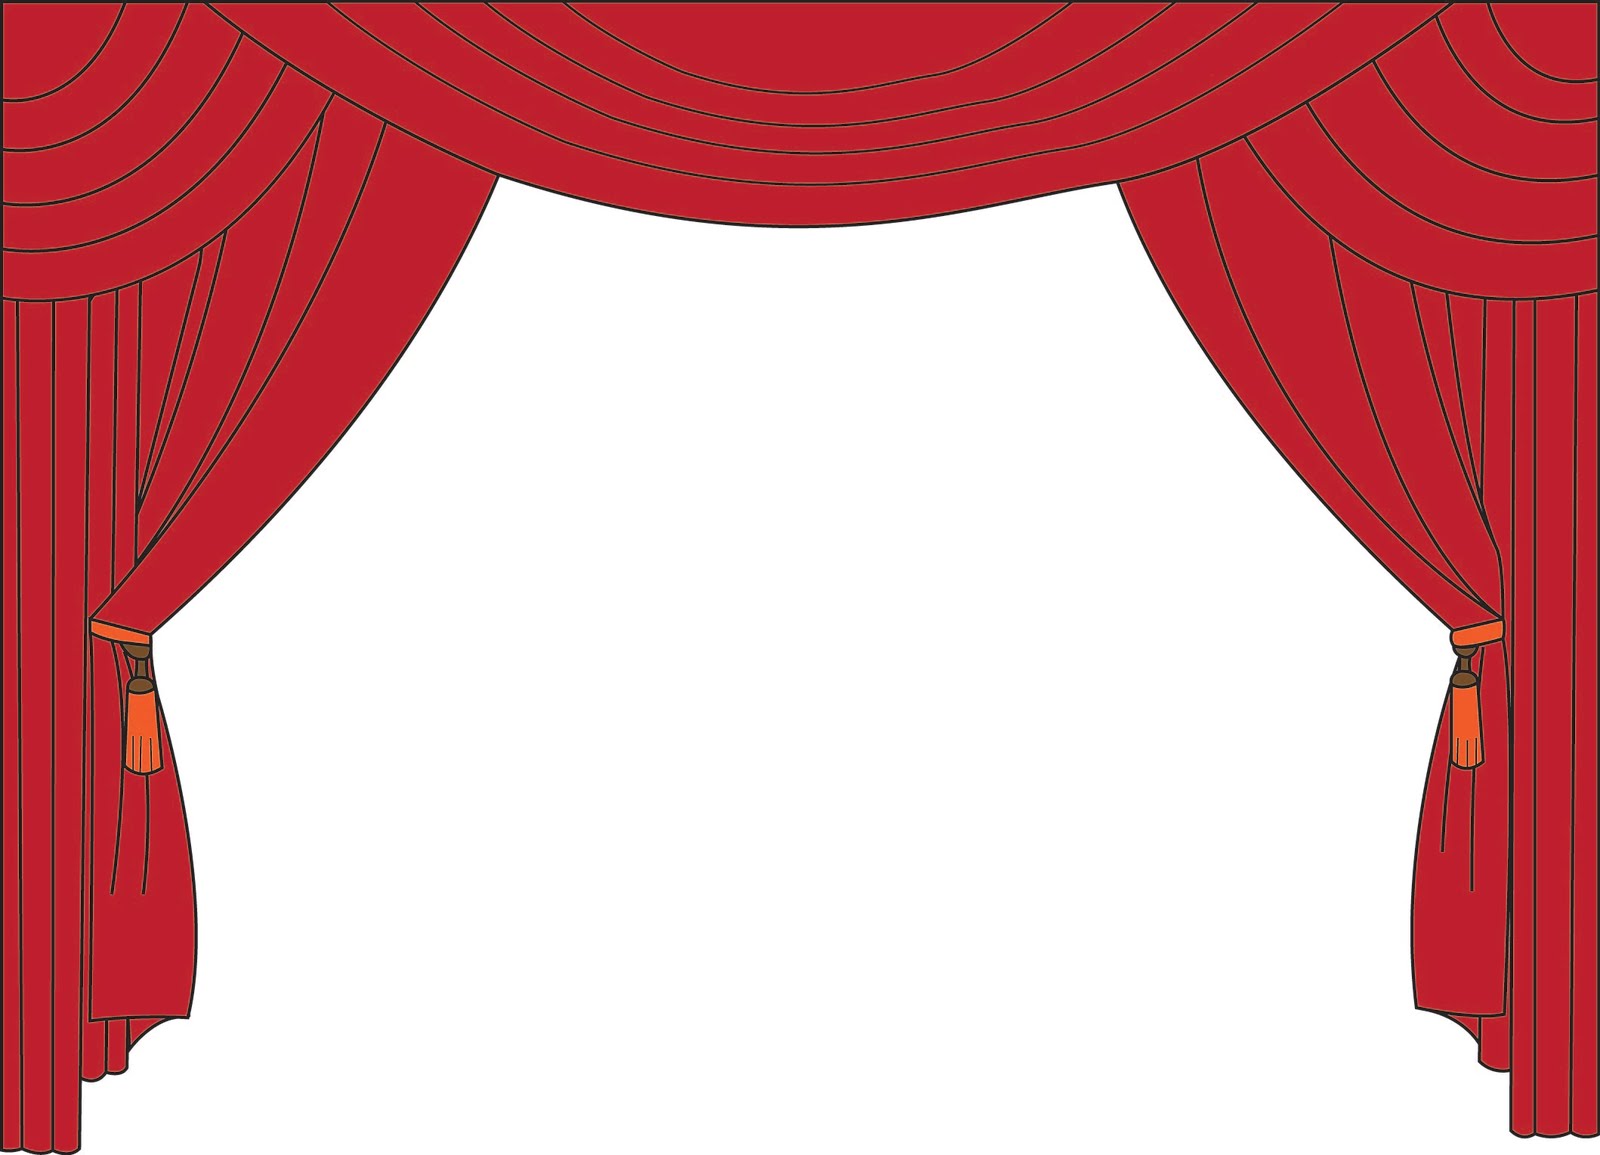 Curtain 20clipart   Clipart Panda   Free Clipart Images